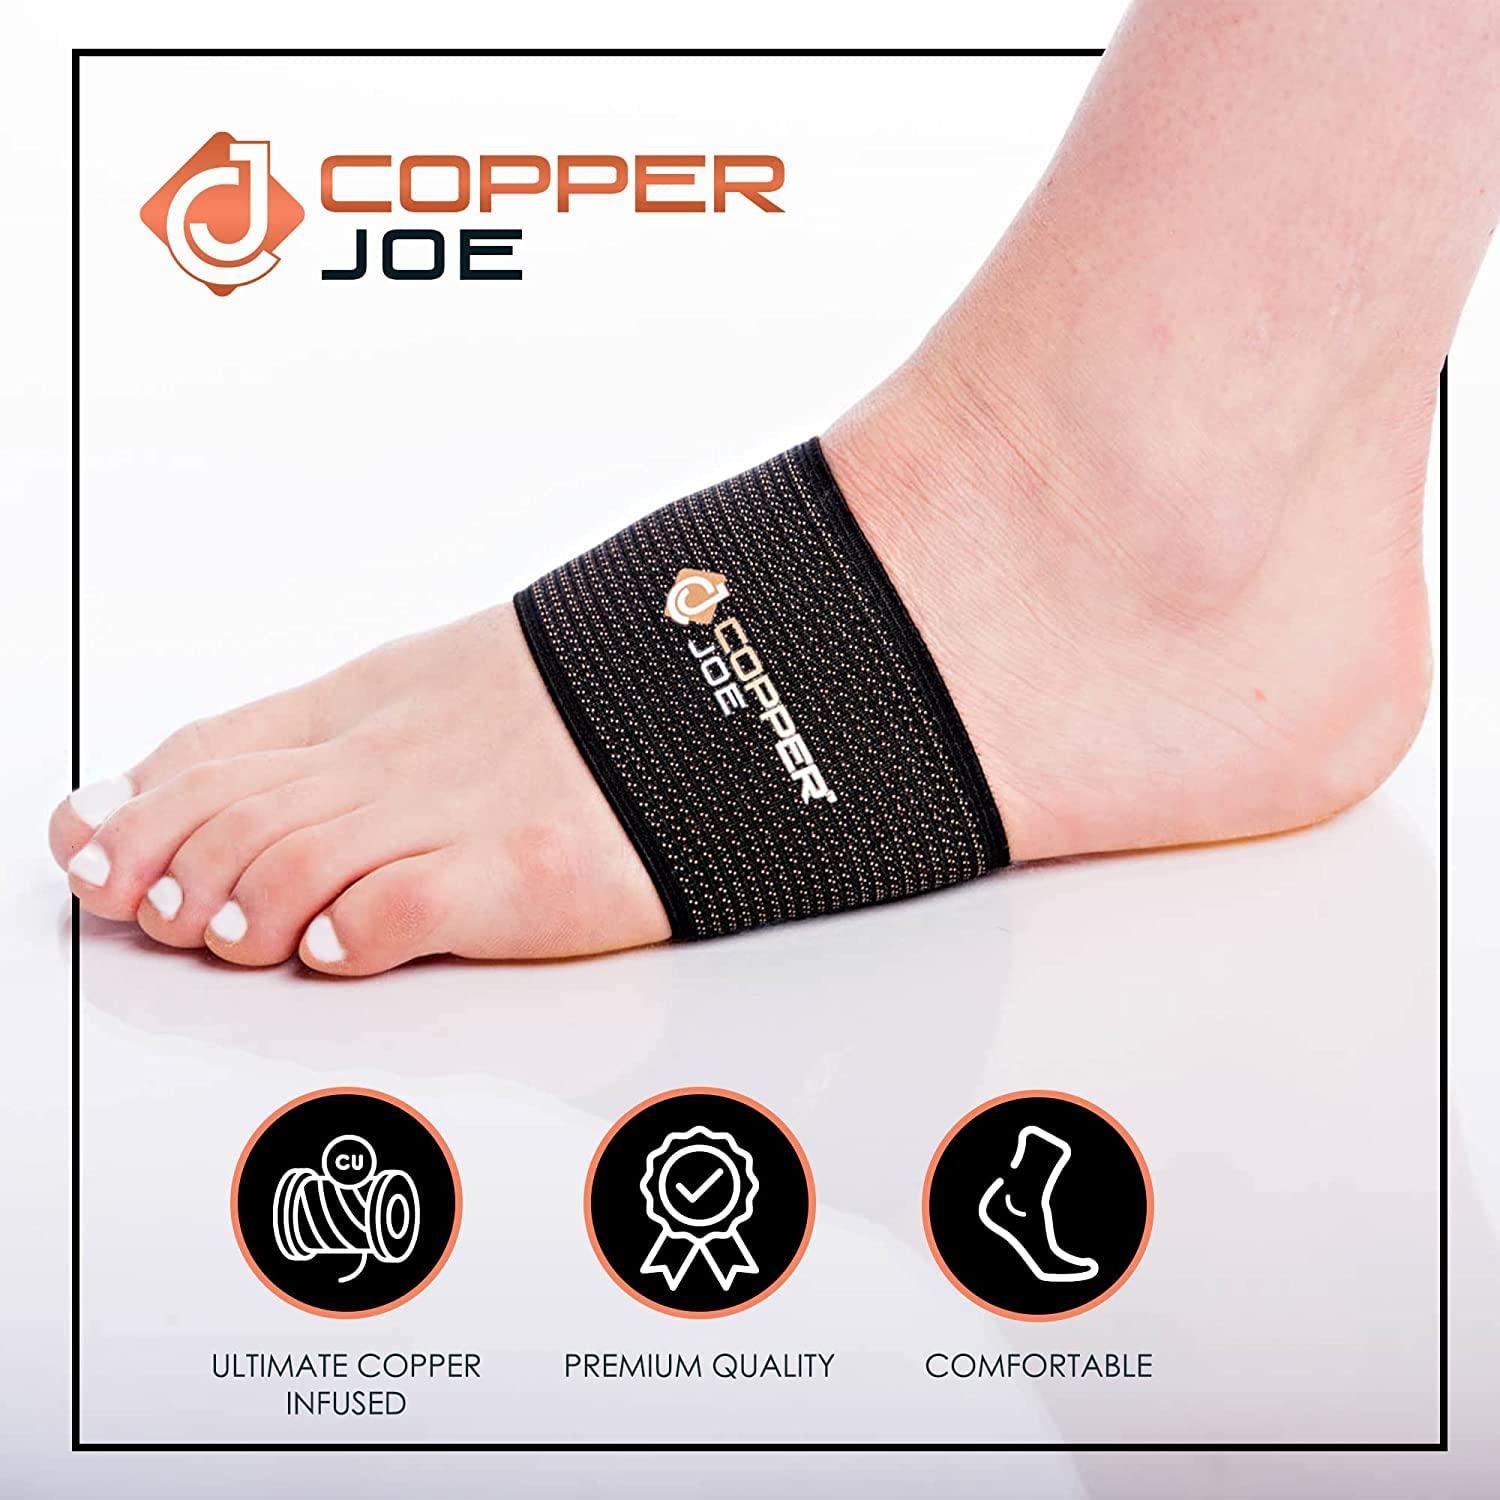 Copper Joe 4 Pack Arch Support - Best Copper Arch Support Brace